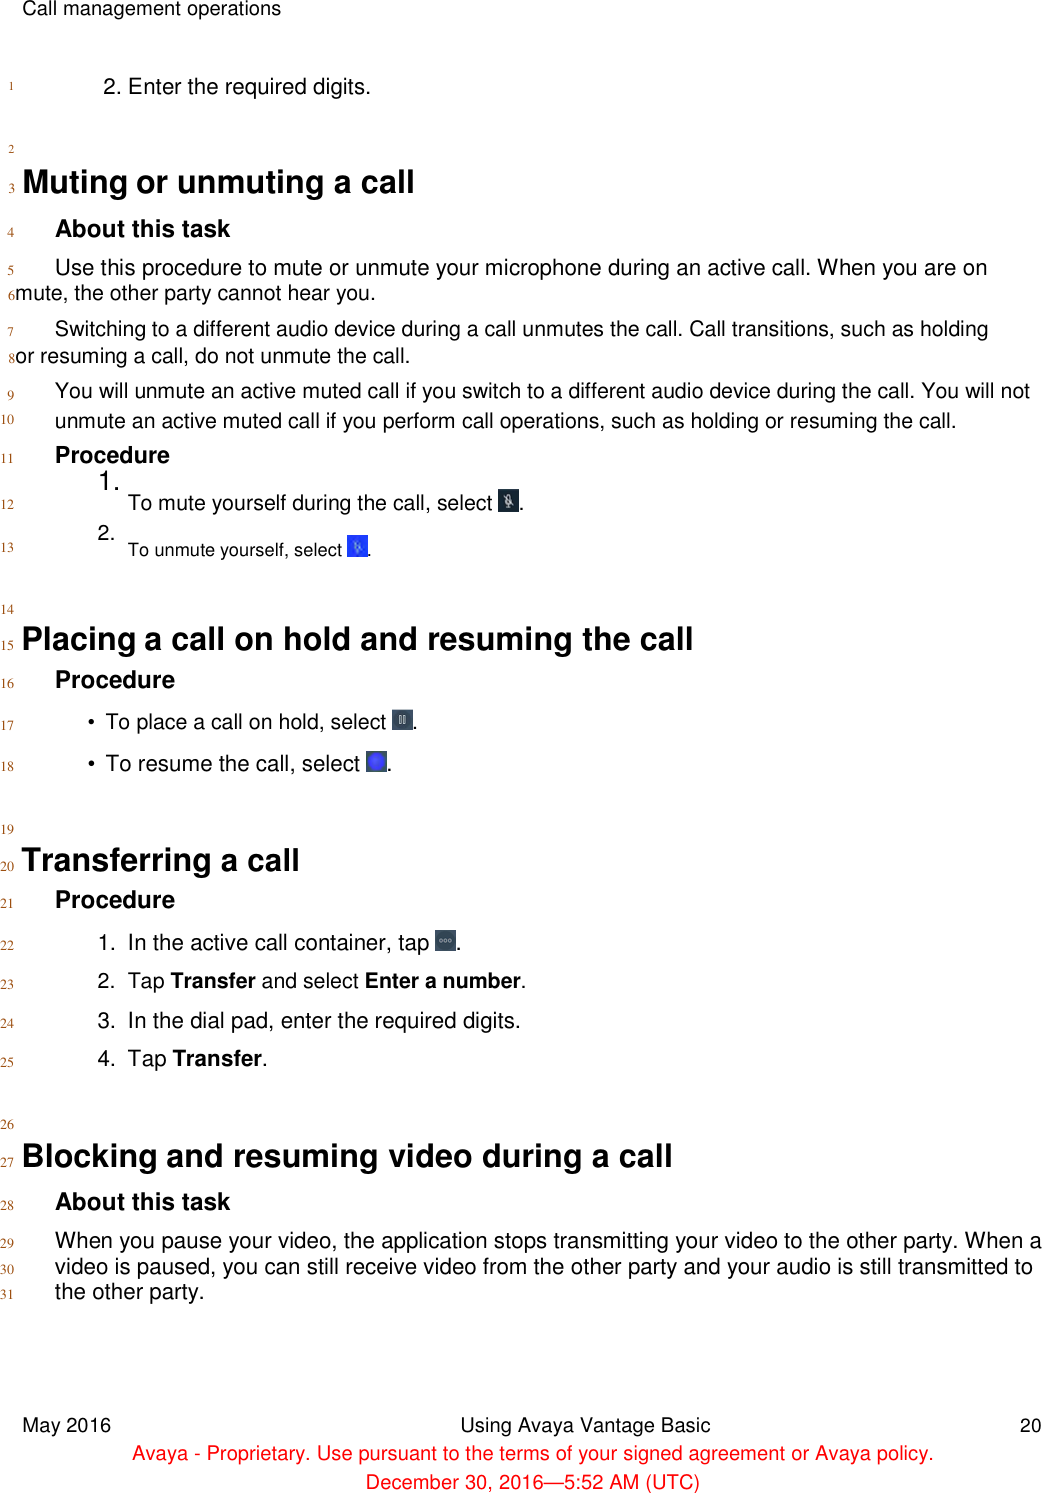      1   2  Call management operations    2. Enter the required digits.  3  Muting or unmuting a call  4 About this task  5 Use this procedure to mute or unmute your microphone during an active call. When you are on  6mute, the other party cannot hear you.  7 Switching to a different audio device during a call unmutes the call. Call transitions, such as holding  8or resuming a call, do not unmute the call.  9  10   You will unmute an active muted call if you switch to a different audio device during the call. You will not unmute an active muted call if you perform call operations, such as holding or resuming the call.  11 Procedure  12  13   14  1. To mute yourself during the call, select  .  2. To unmute yourself, select  .  15  Placing a call on hold and resuming the call  16 Procedure  17  18   19   •  To place a call on hold, select  .  •  To resume the call, select  .  20  Transferring a call  21 Procedure  22  23  24  25   26   1.  In the active call container, tap  .  2.  Tap Transfer and select Enter a number.  3.  In the dial pad, enter the required digits.  4.  Tap Transfer.  27  Blocking and resuming video during a call  28 About this task  29 When you pause your video, the application stops transmitting your video to the other party. When a  30 video is paused, you can still receive video from the other party and your audio is still transmitted to 31 the other party.      May 2016 Using Avaya Vantage Basic 20  Avaya - Proprietary. Use pursuant to the terms of your signed agreement or Avaya policy.  December 30, 2016—5:52 AM (UTC) 